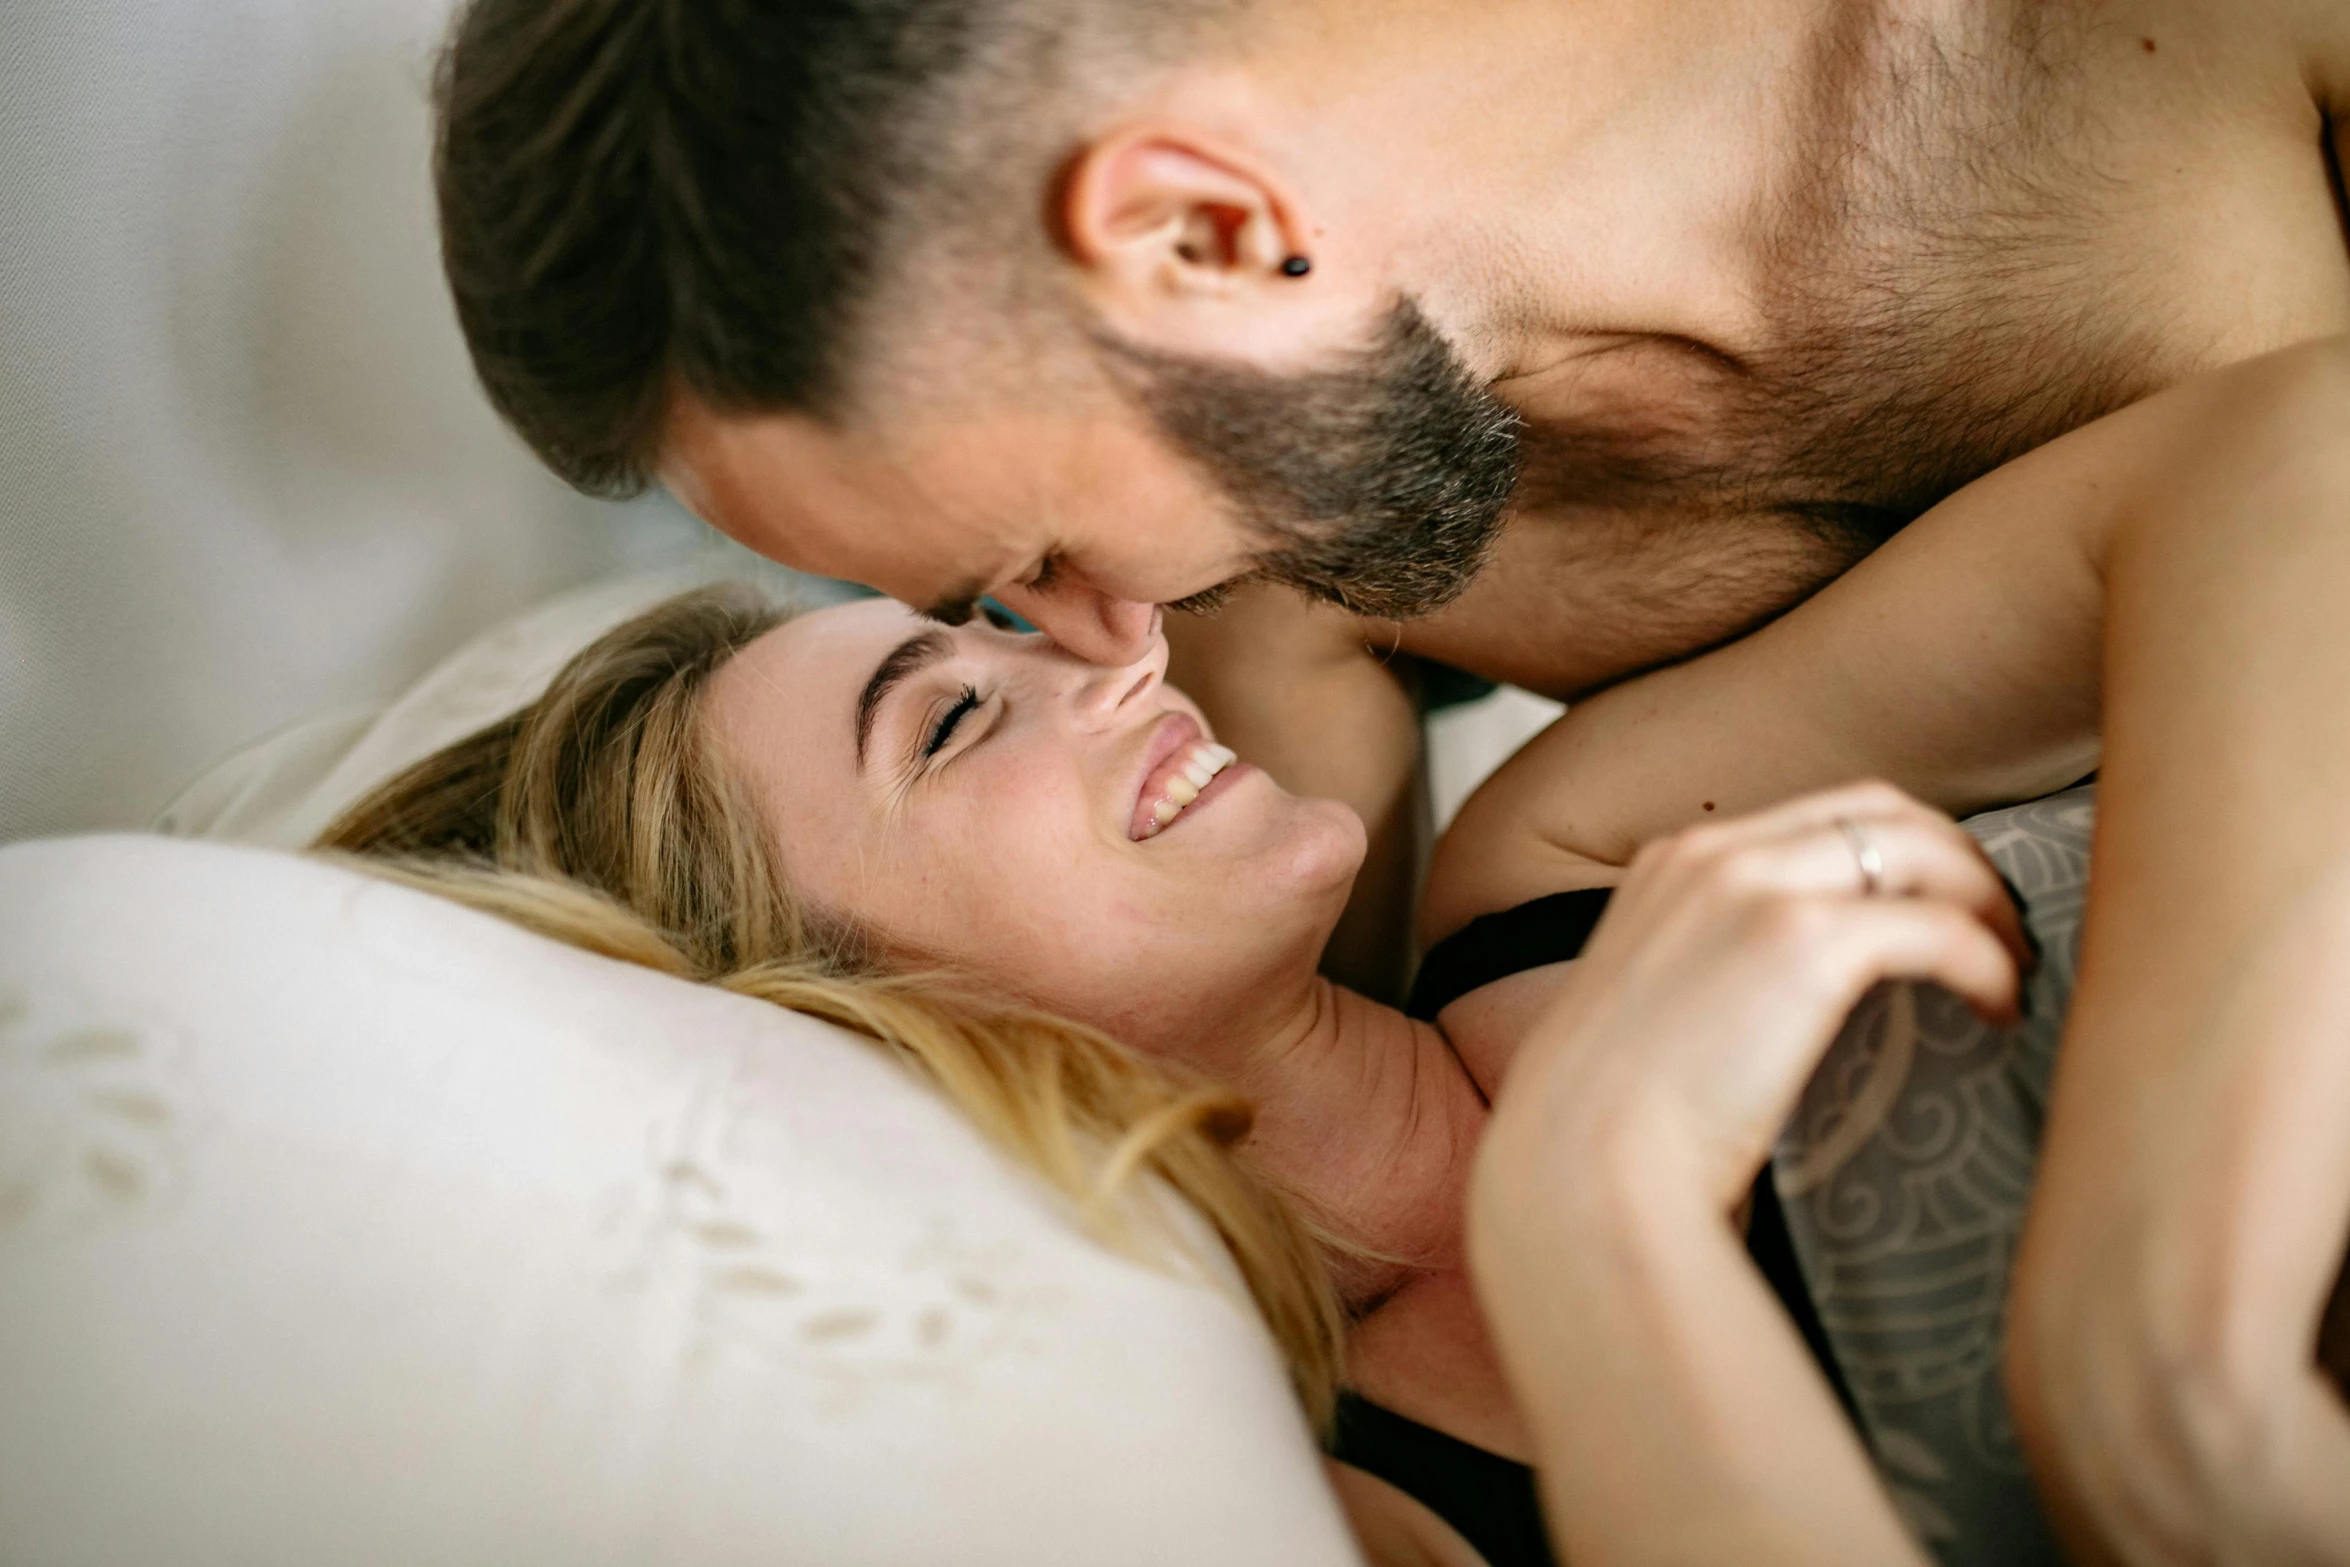 a man and a woman laying in bed together, pexels contest winner, kissing smile, bottom body close up, female gigachad, profile image